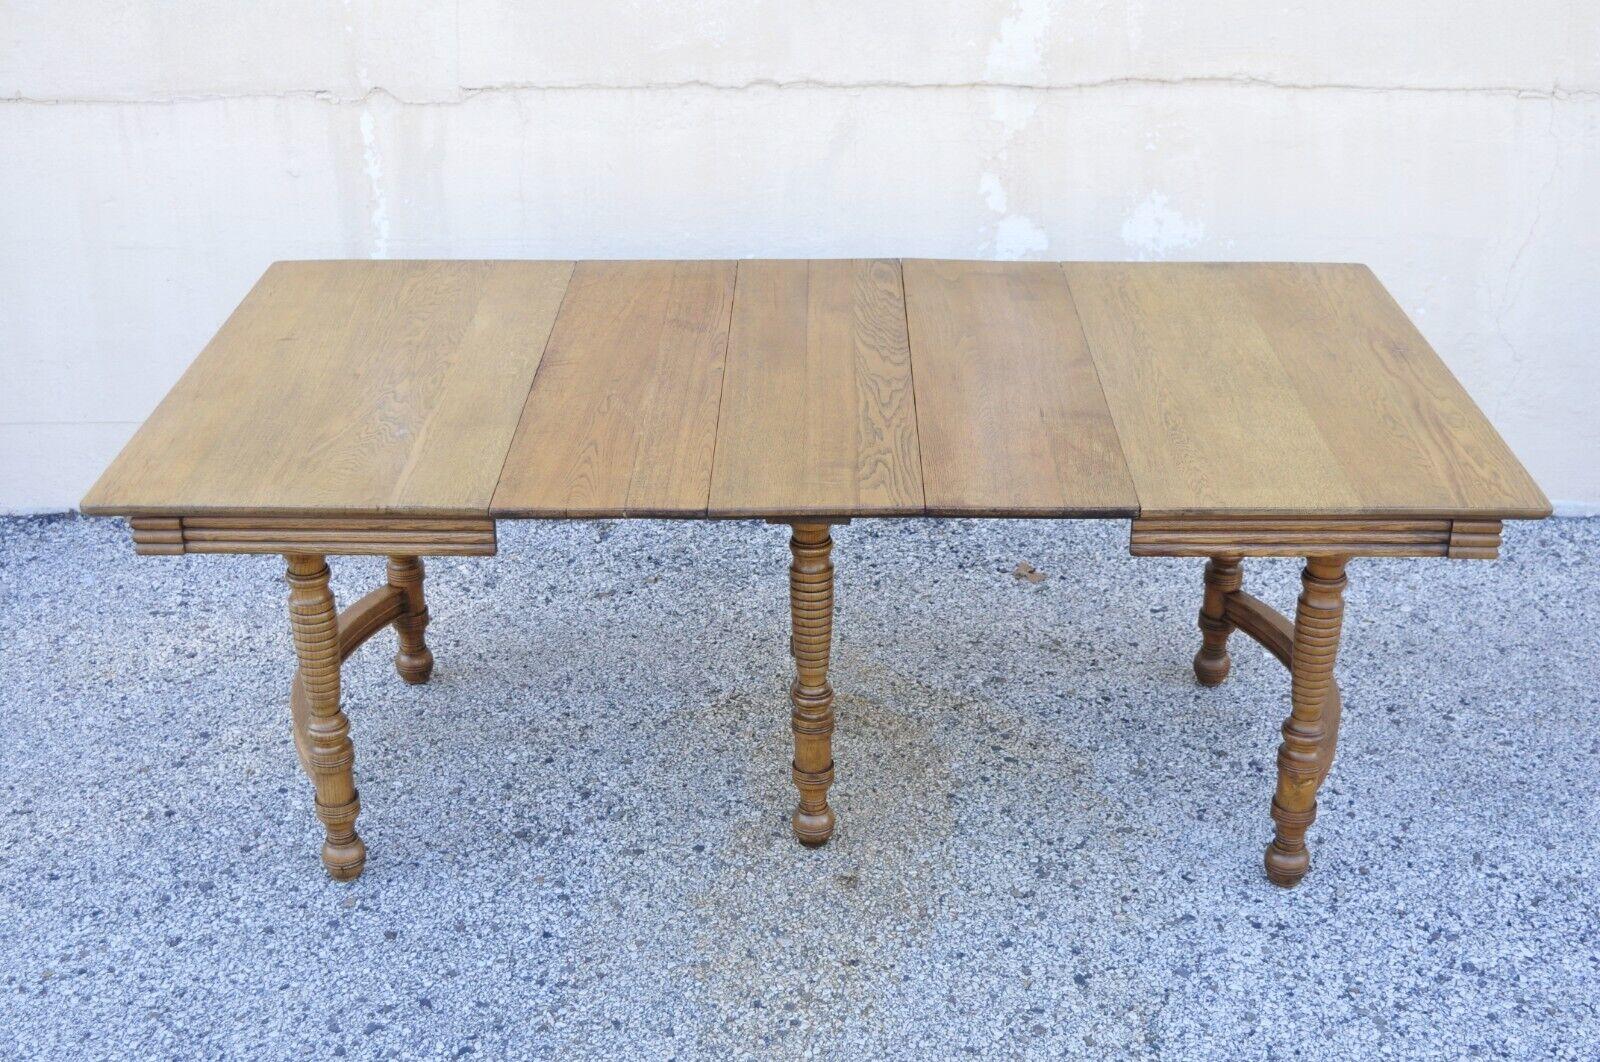 20th Century Antique American Victorian Oak Wood Square Extension Dining Table with 3 Leaves For Sale